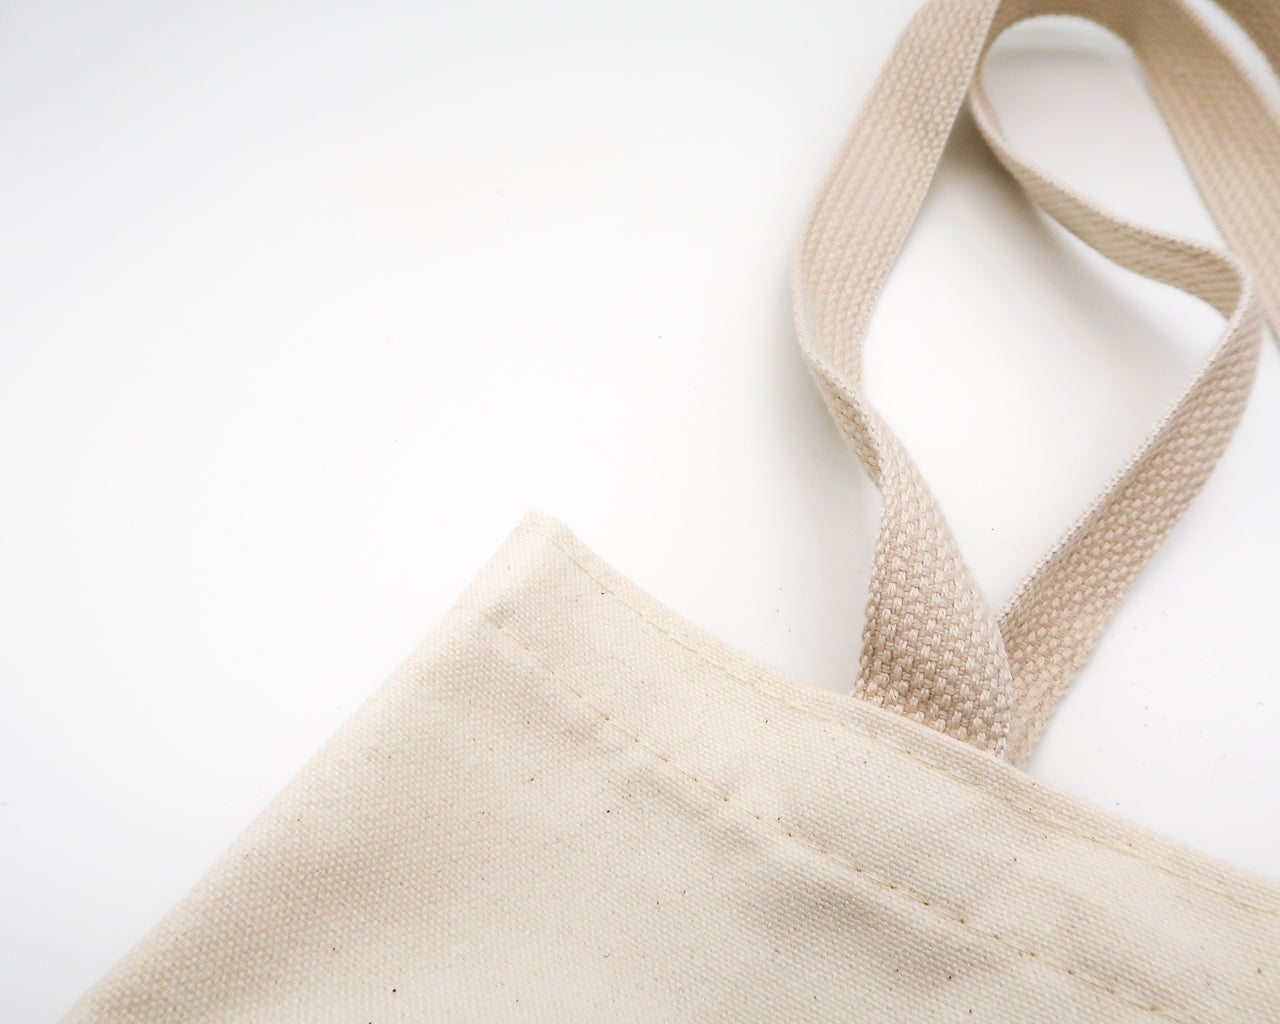 a tan tote bag against a white background